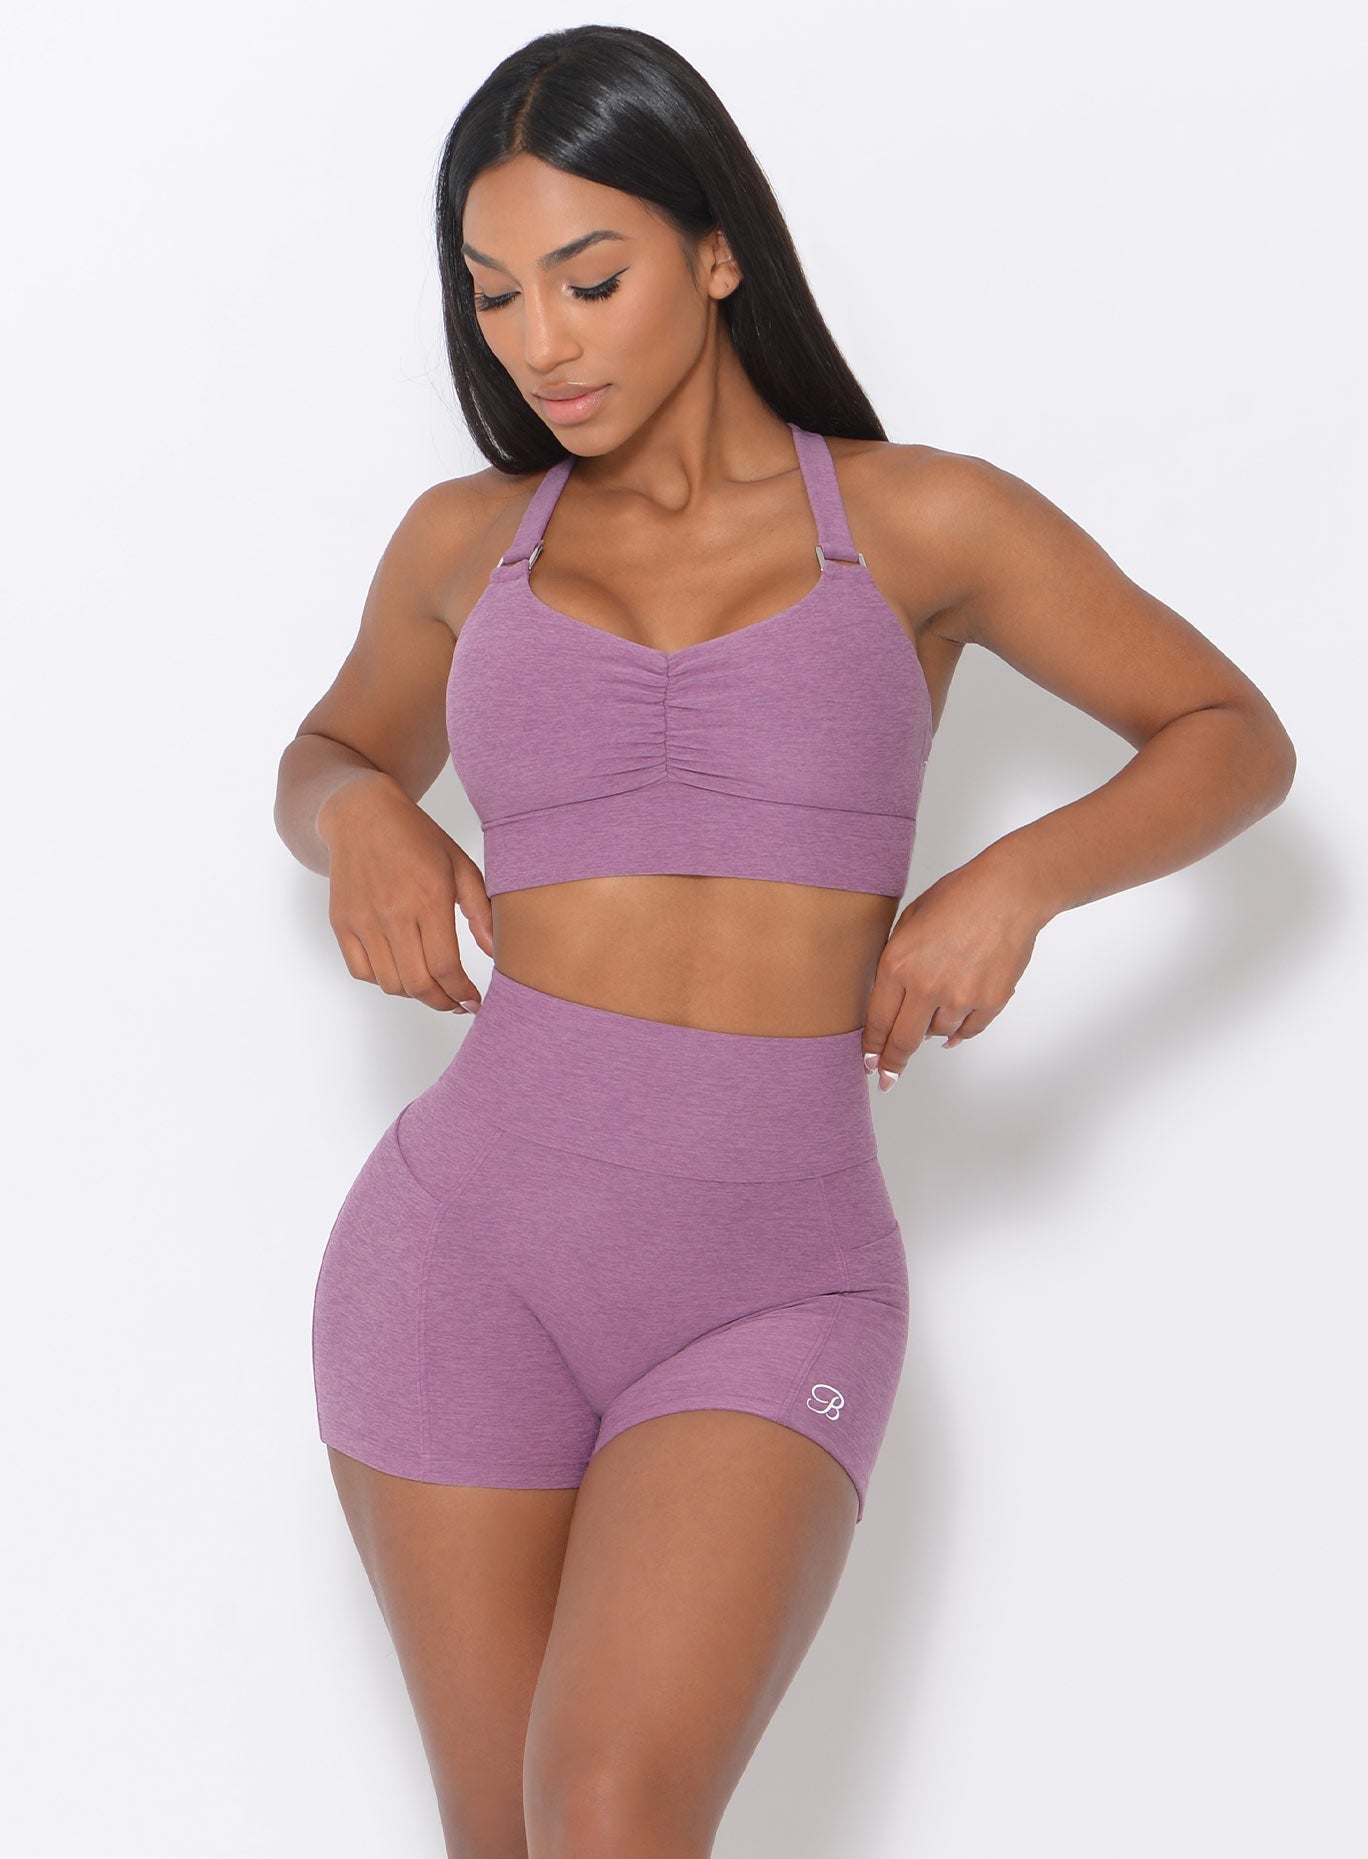 Front view of the model wearing our perfection sports bra in lavender and a matching shorts 